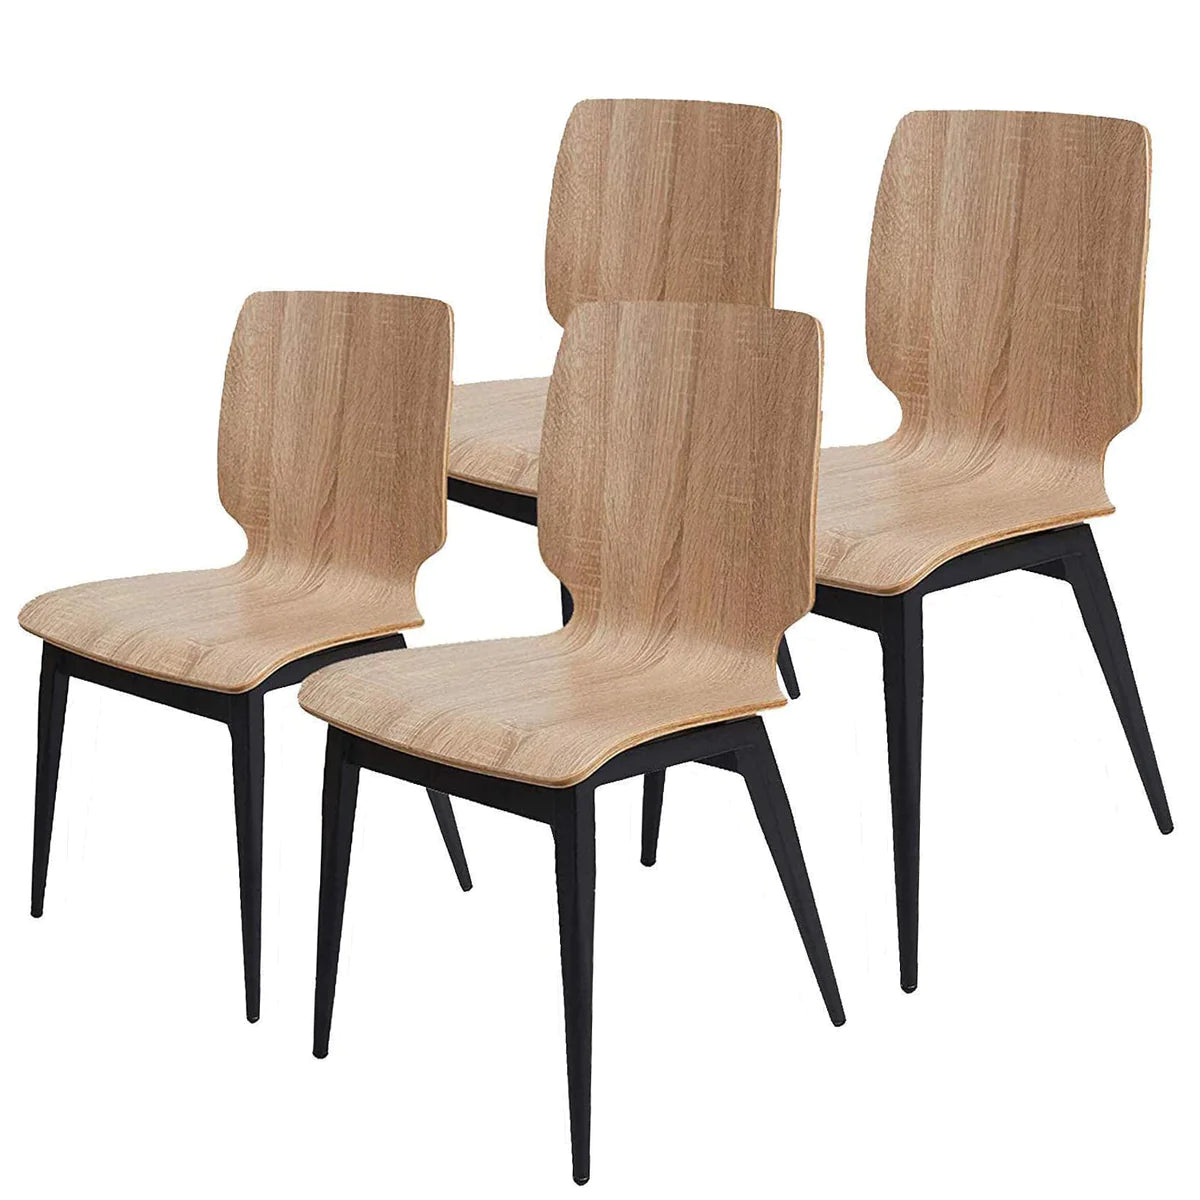 4 Set of  Modern Kitchen Chairs with Wooden Seats Metal Legs Dining Side Chair